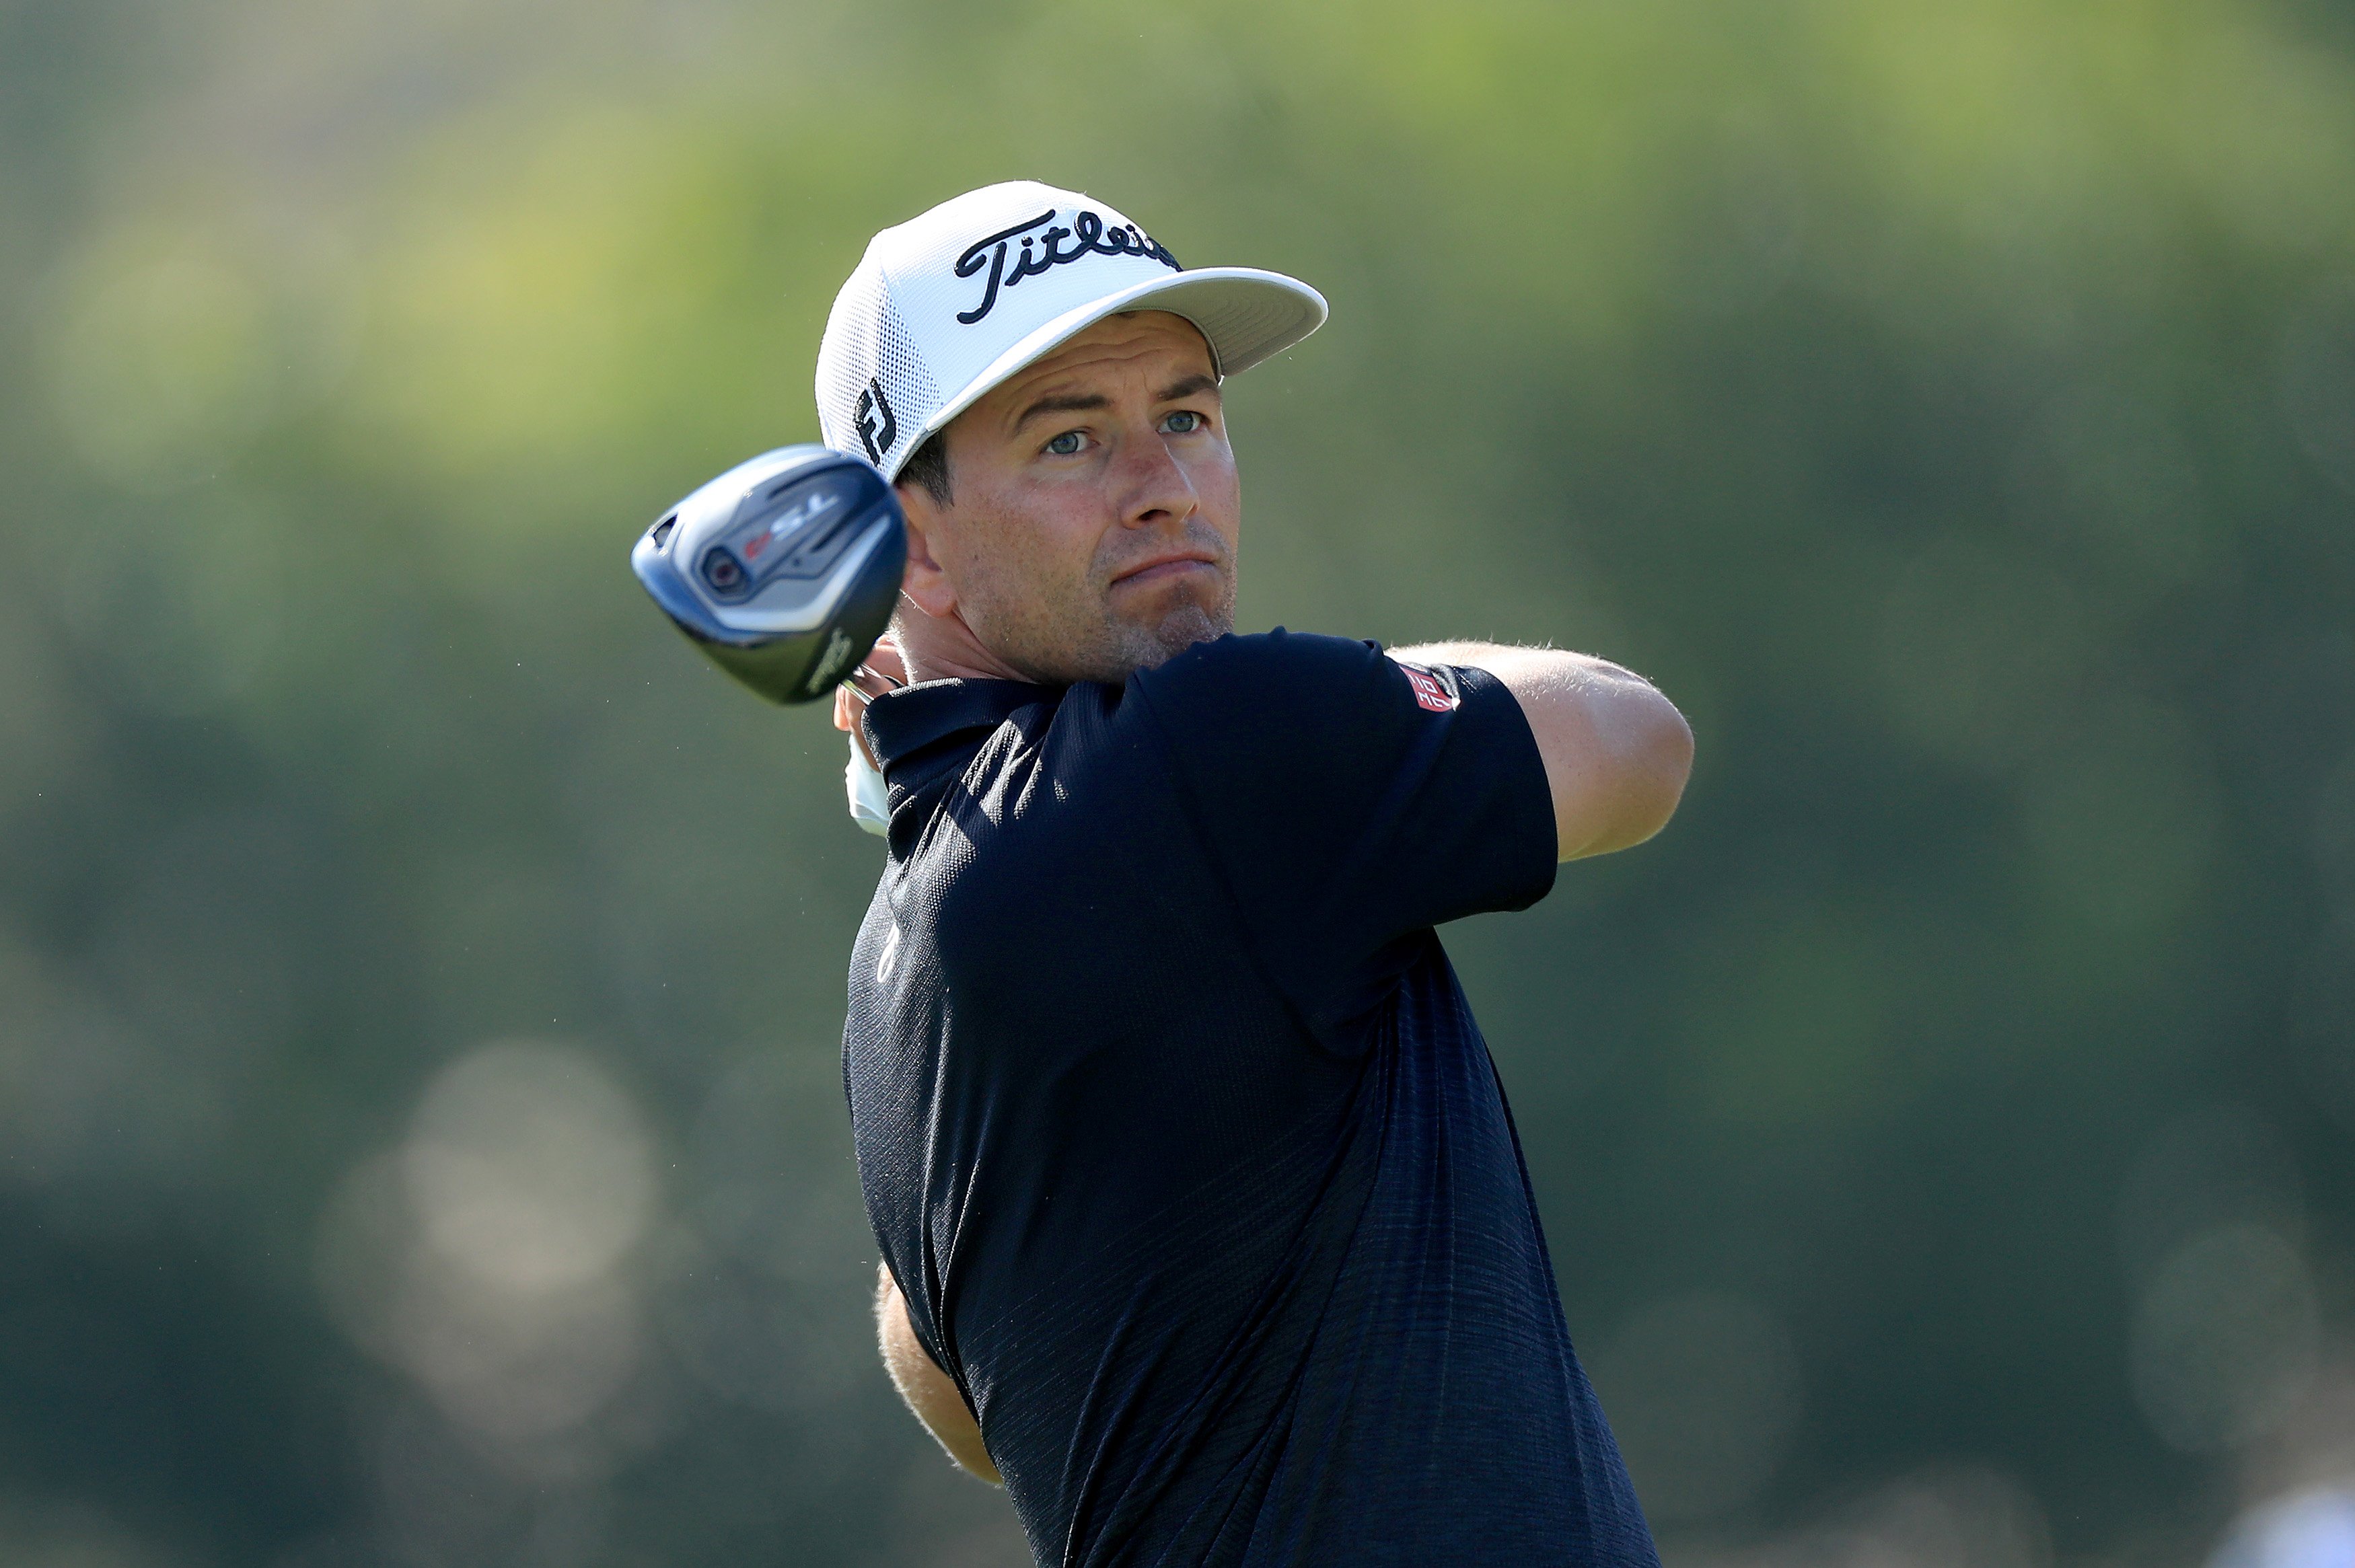  Adam Scott plays golf during the third round of the Genesis Invitational at The Riviera Country Club on February 15, 2020, in Pacific Palisades, California. | Source: Getty Images.